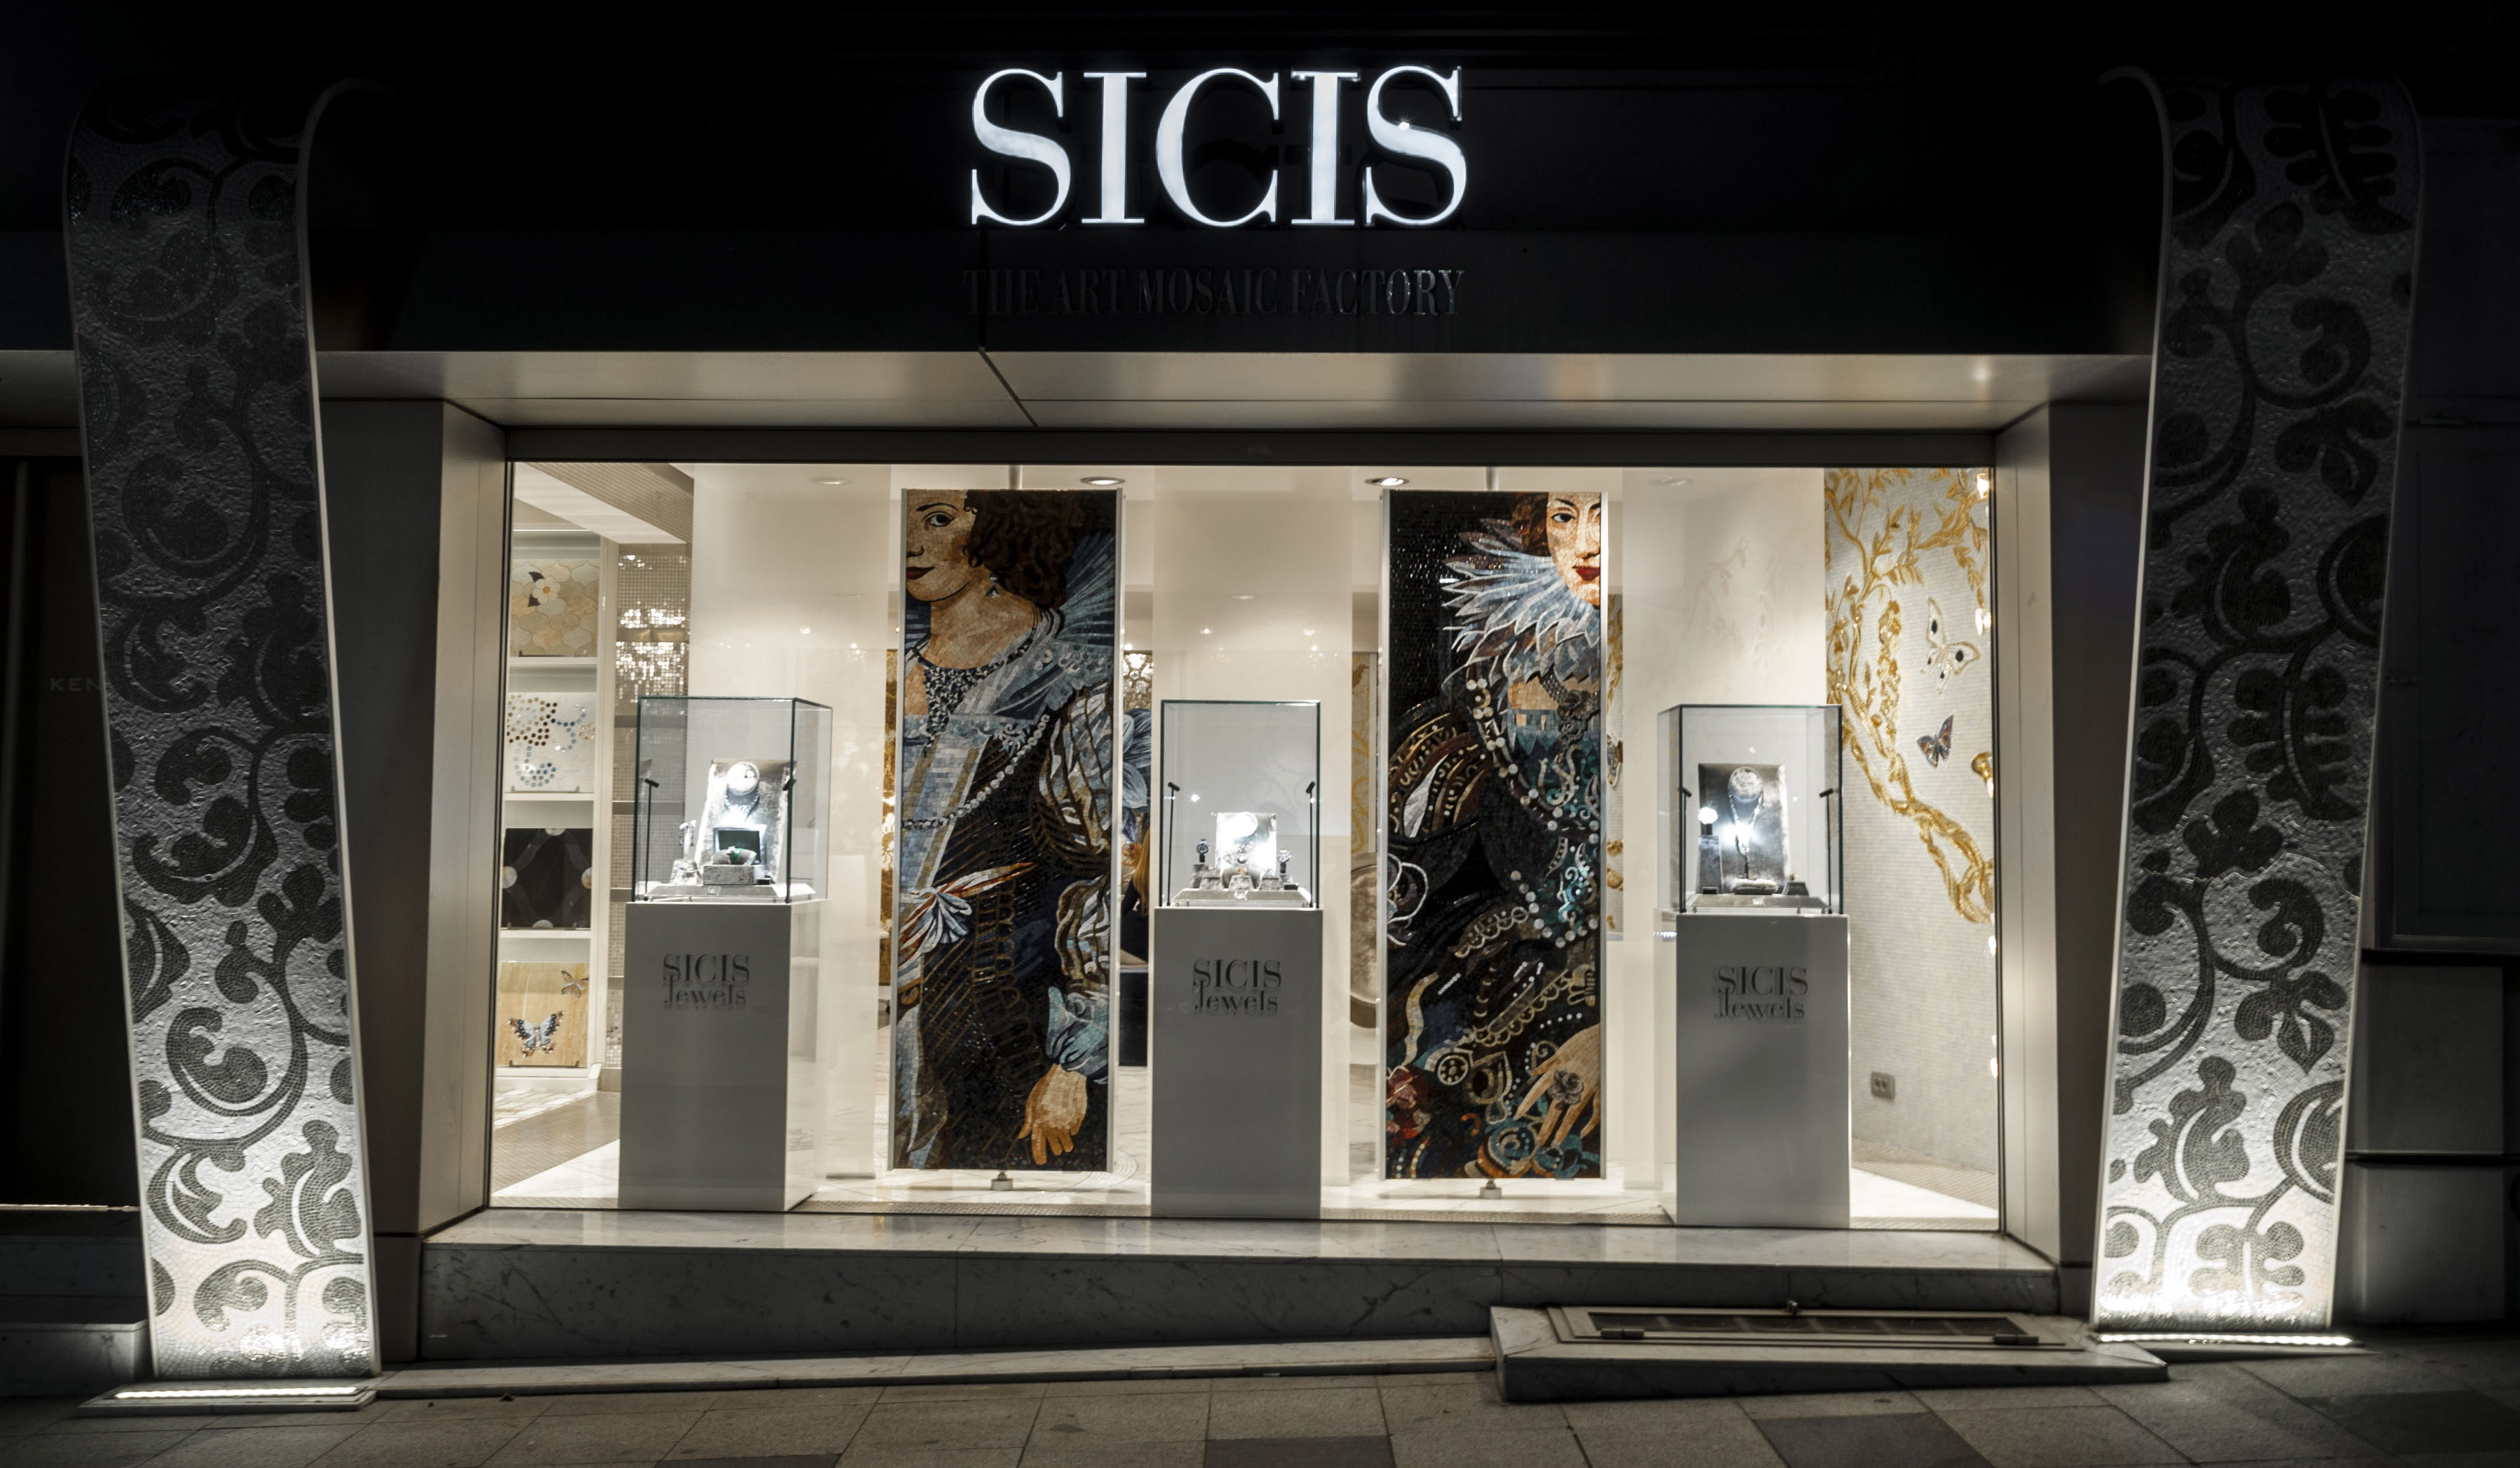 5-front-view-window-showroom-istanbul-sicis-jewelsoctober-2013